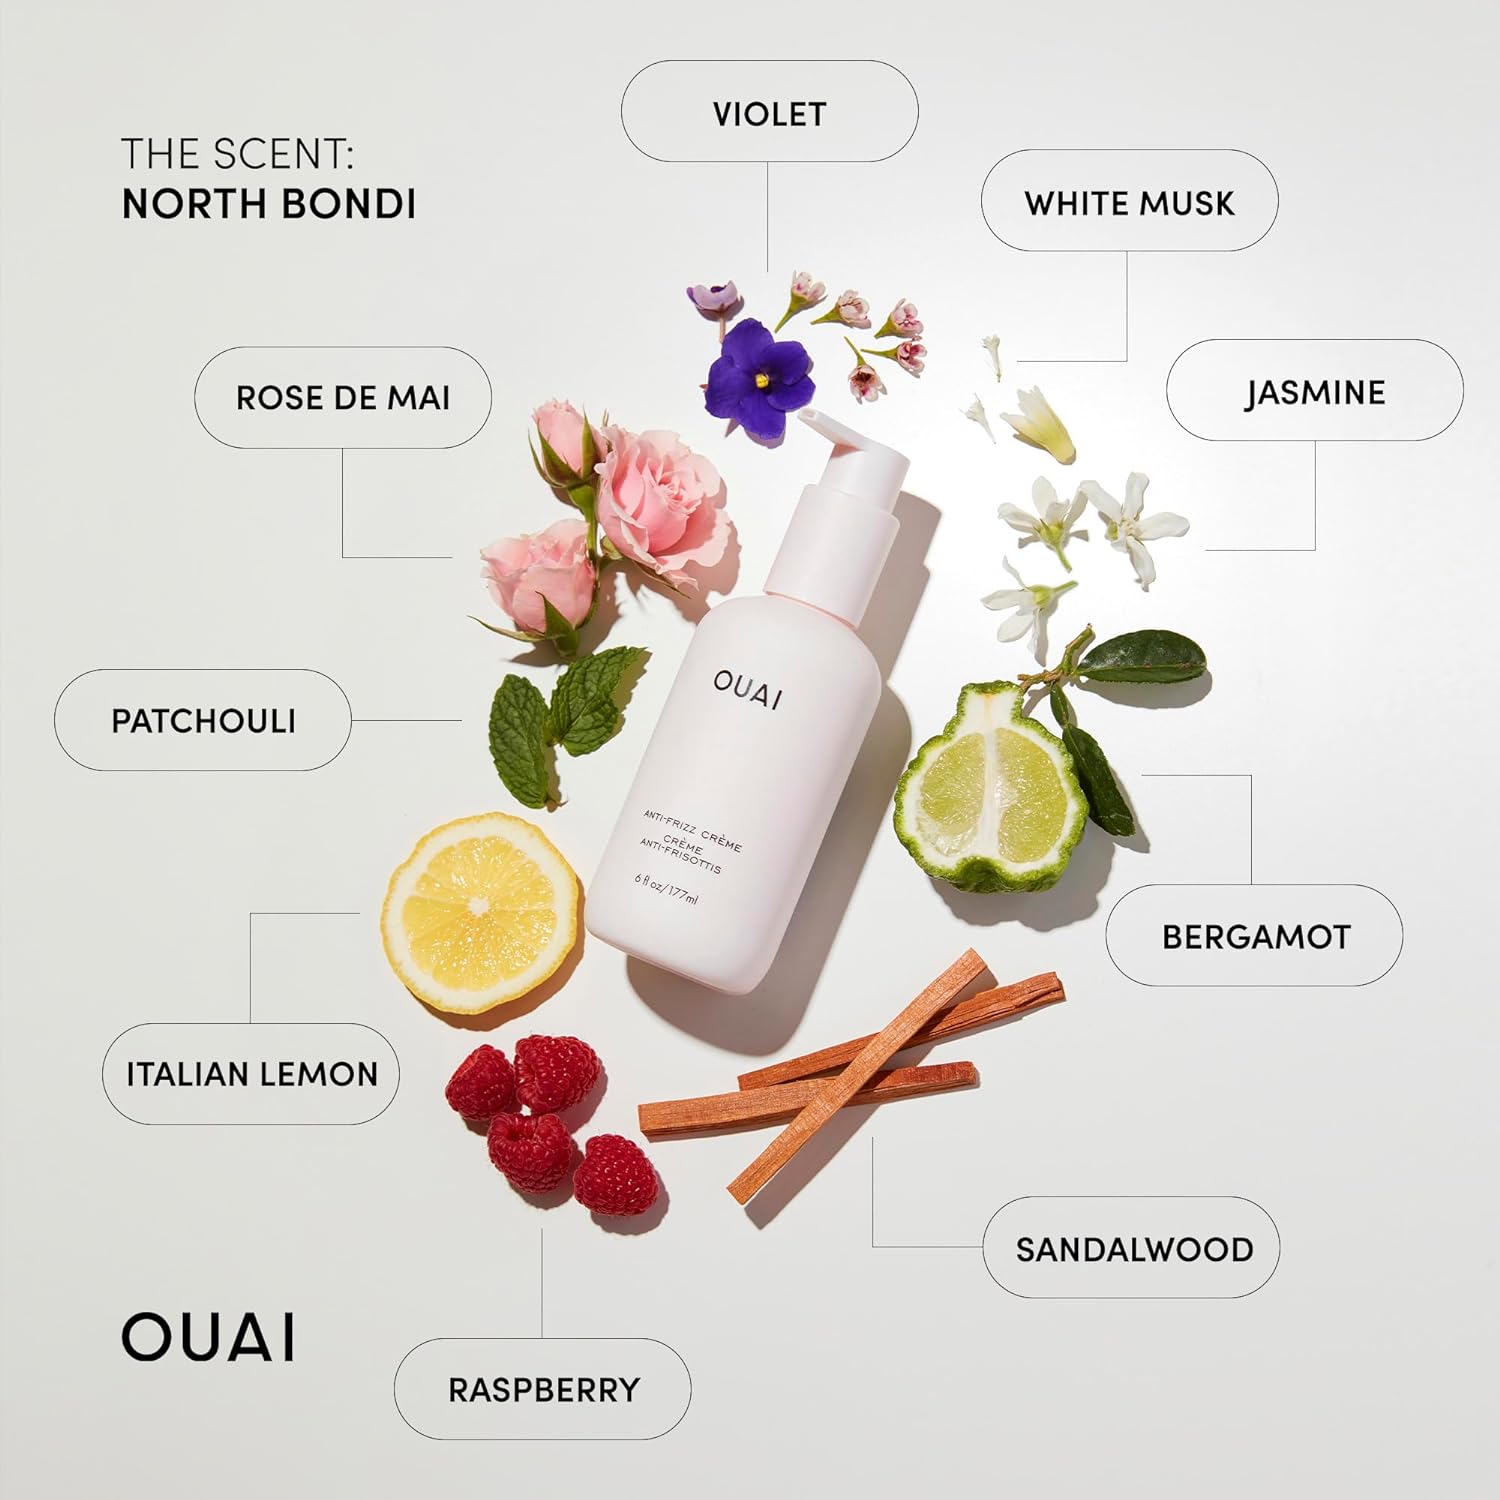 OUAI Anti Frizz Cream Travel Size - Moisturizing Hair Cream with Frizz Control & Heat Protection - Provides Hydration with Jackfruit & Beetroot Extract - Paraben, Phthalate & Sulfate Free (3 oz) : Beauty & Personal Care